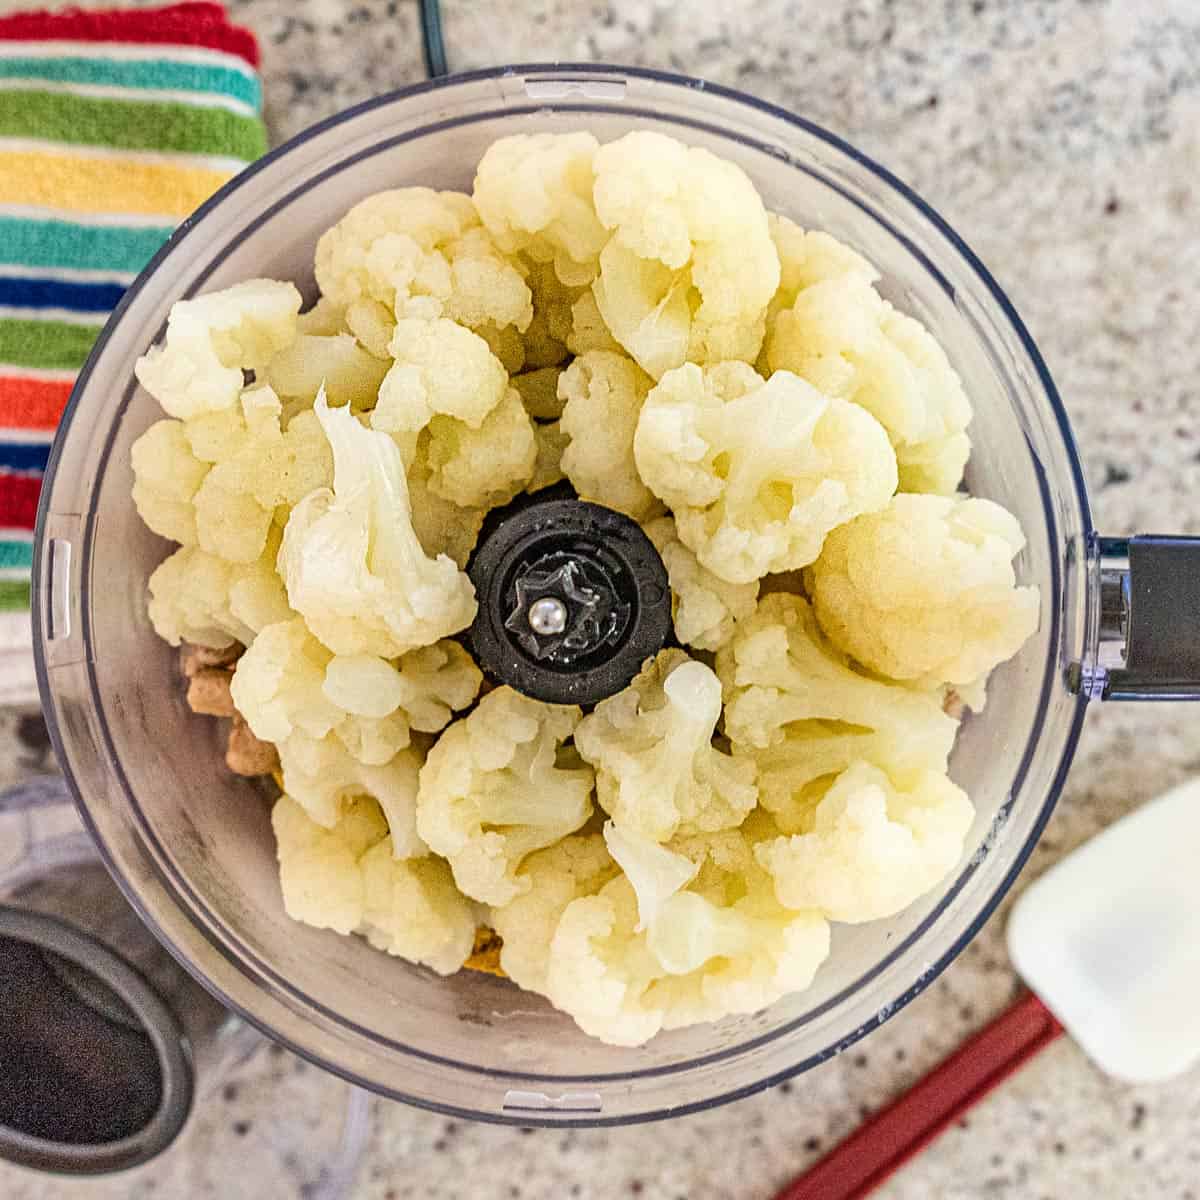 Cooked cauliflower in a food processor to be pureed.